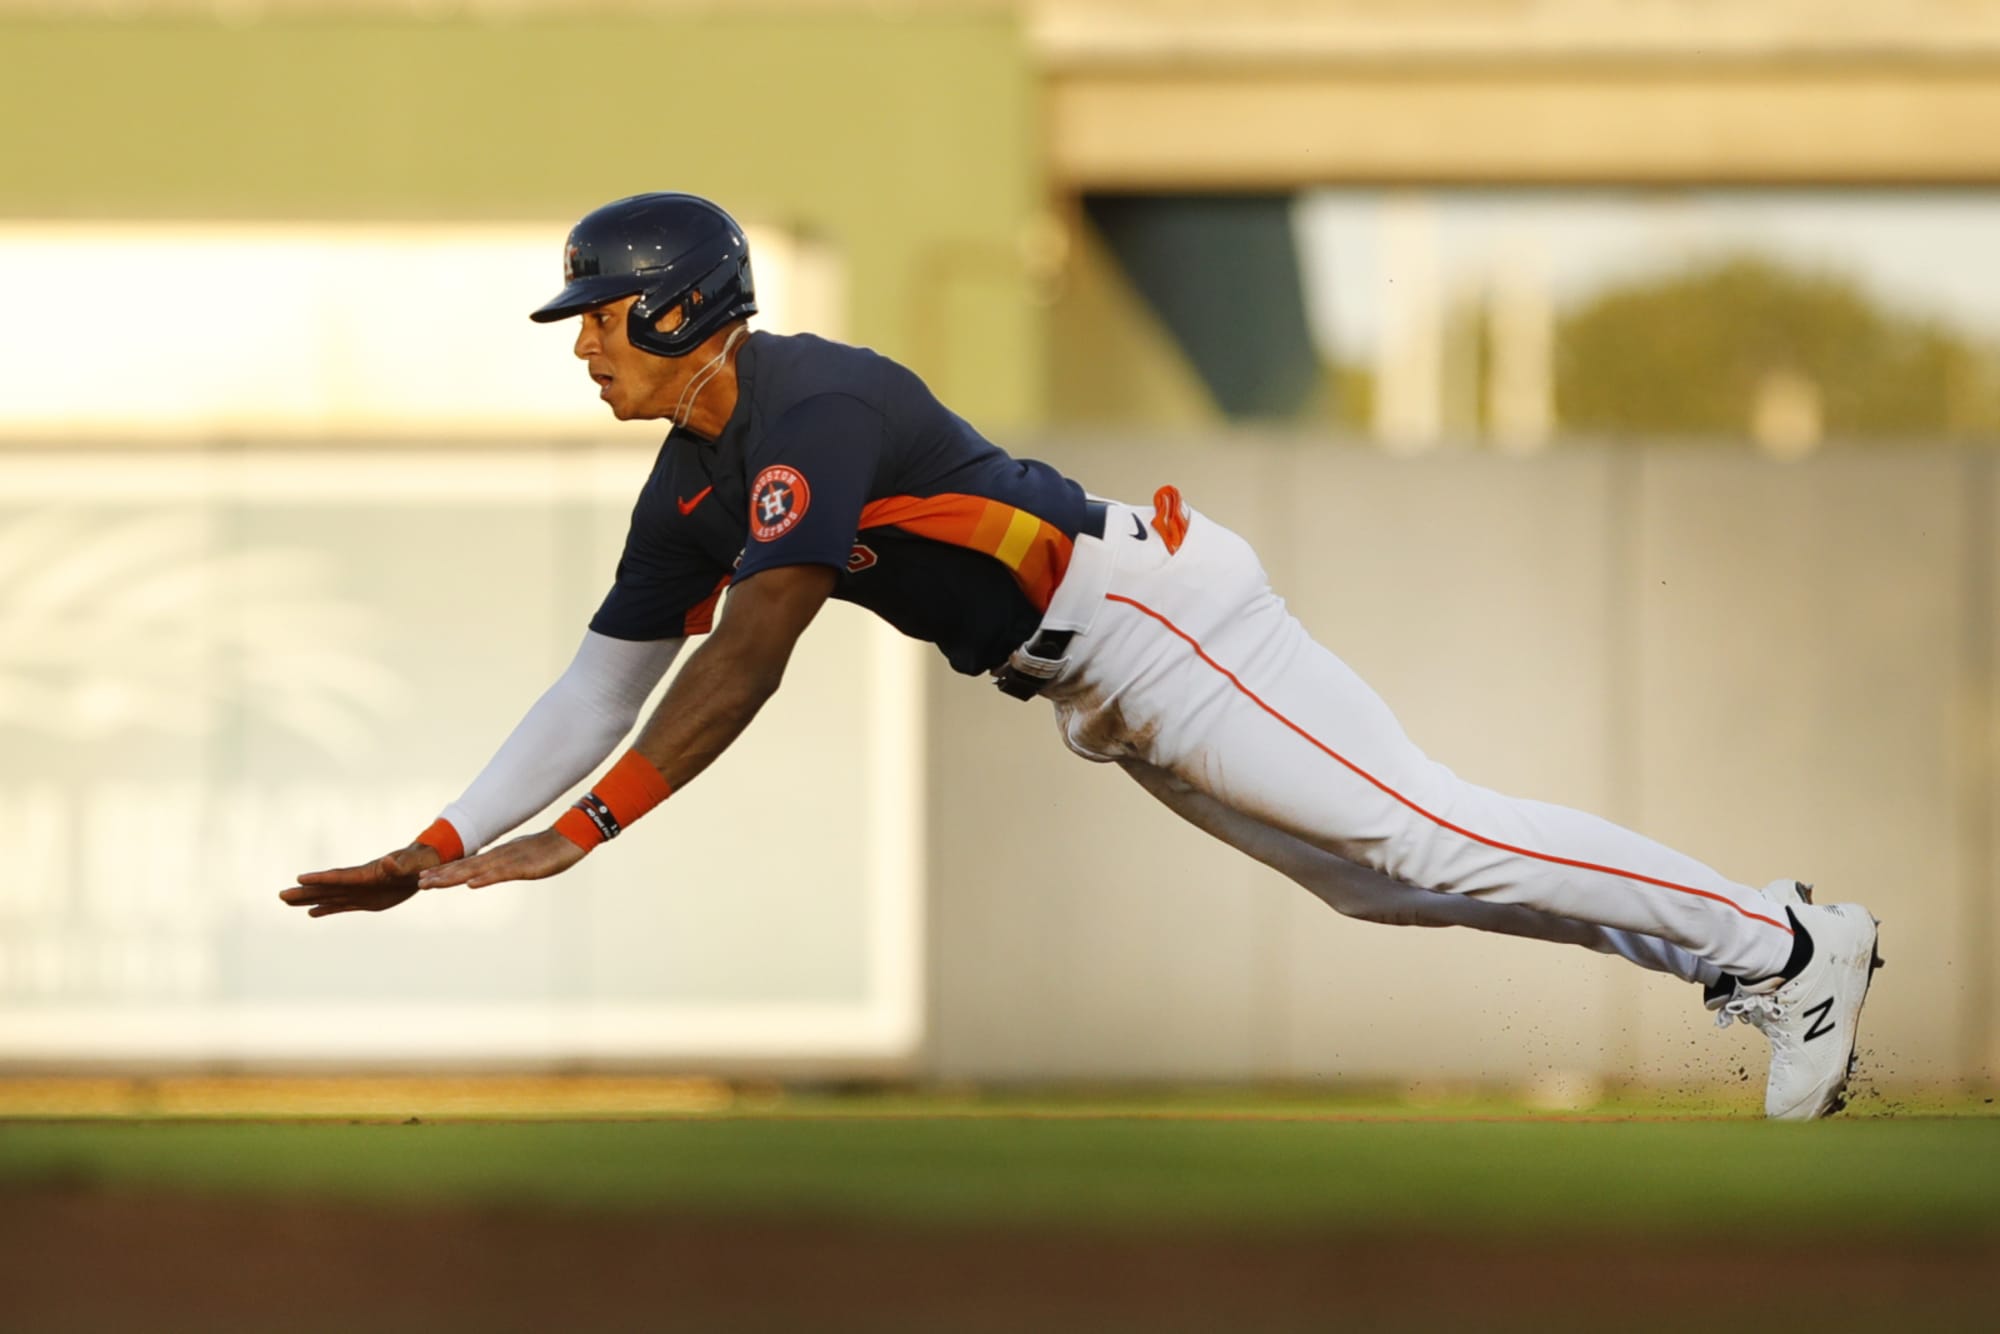 Predicting the Houston Astros Opening Day Roster